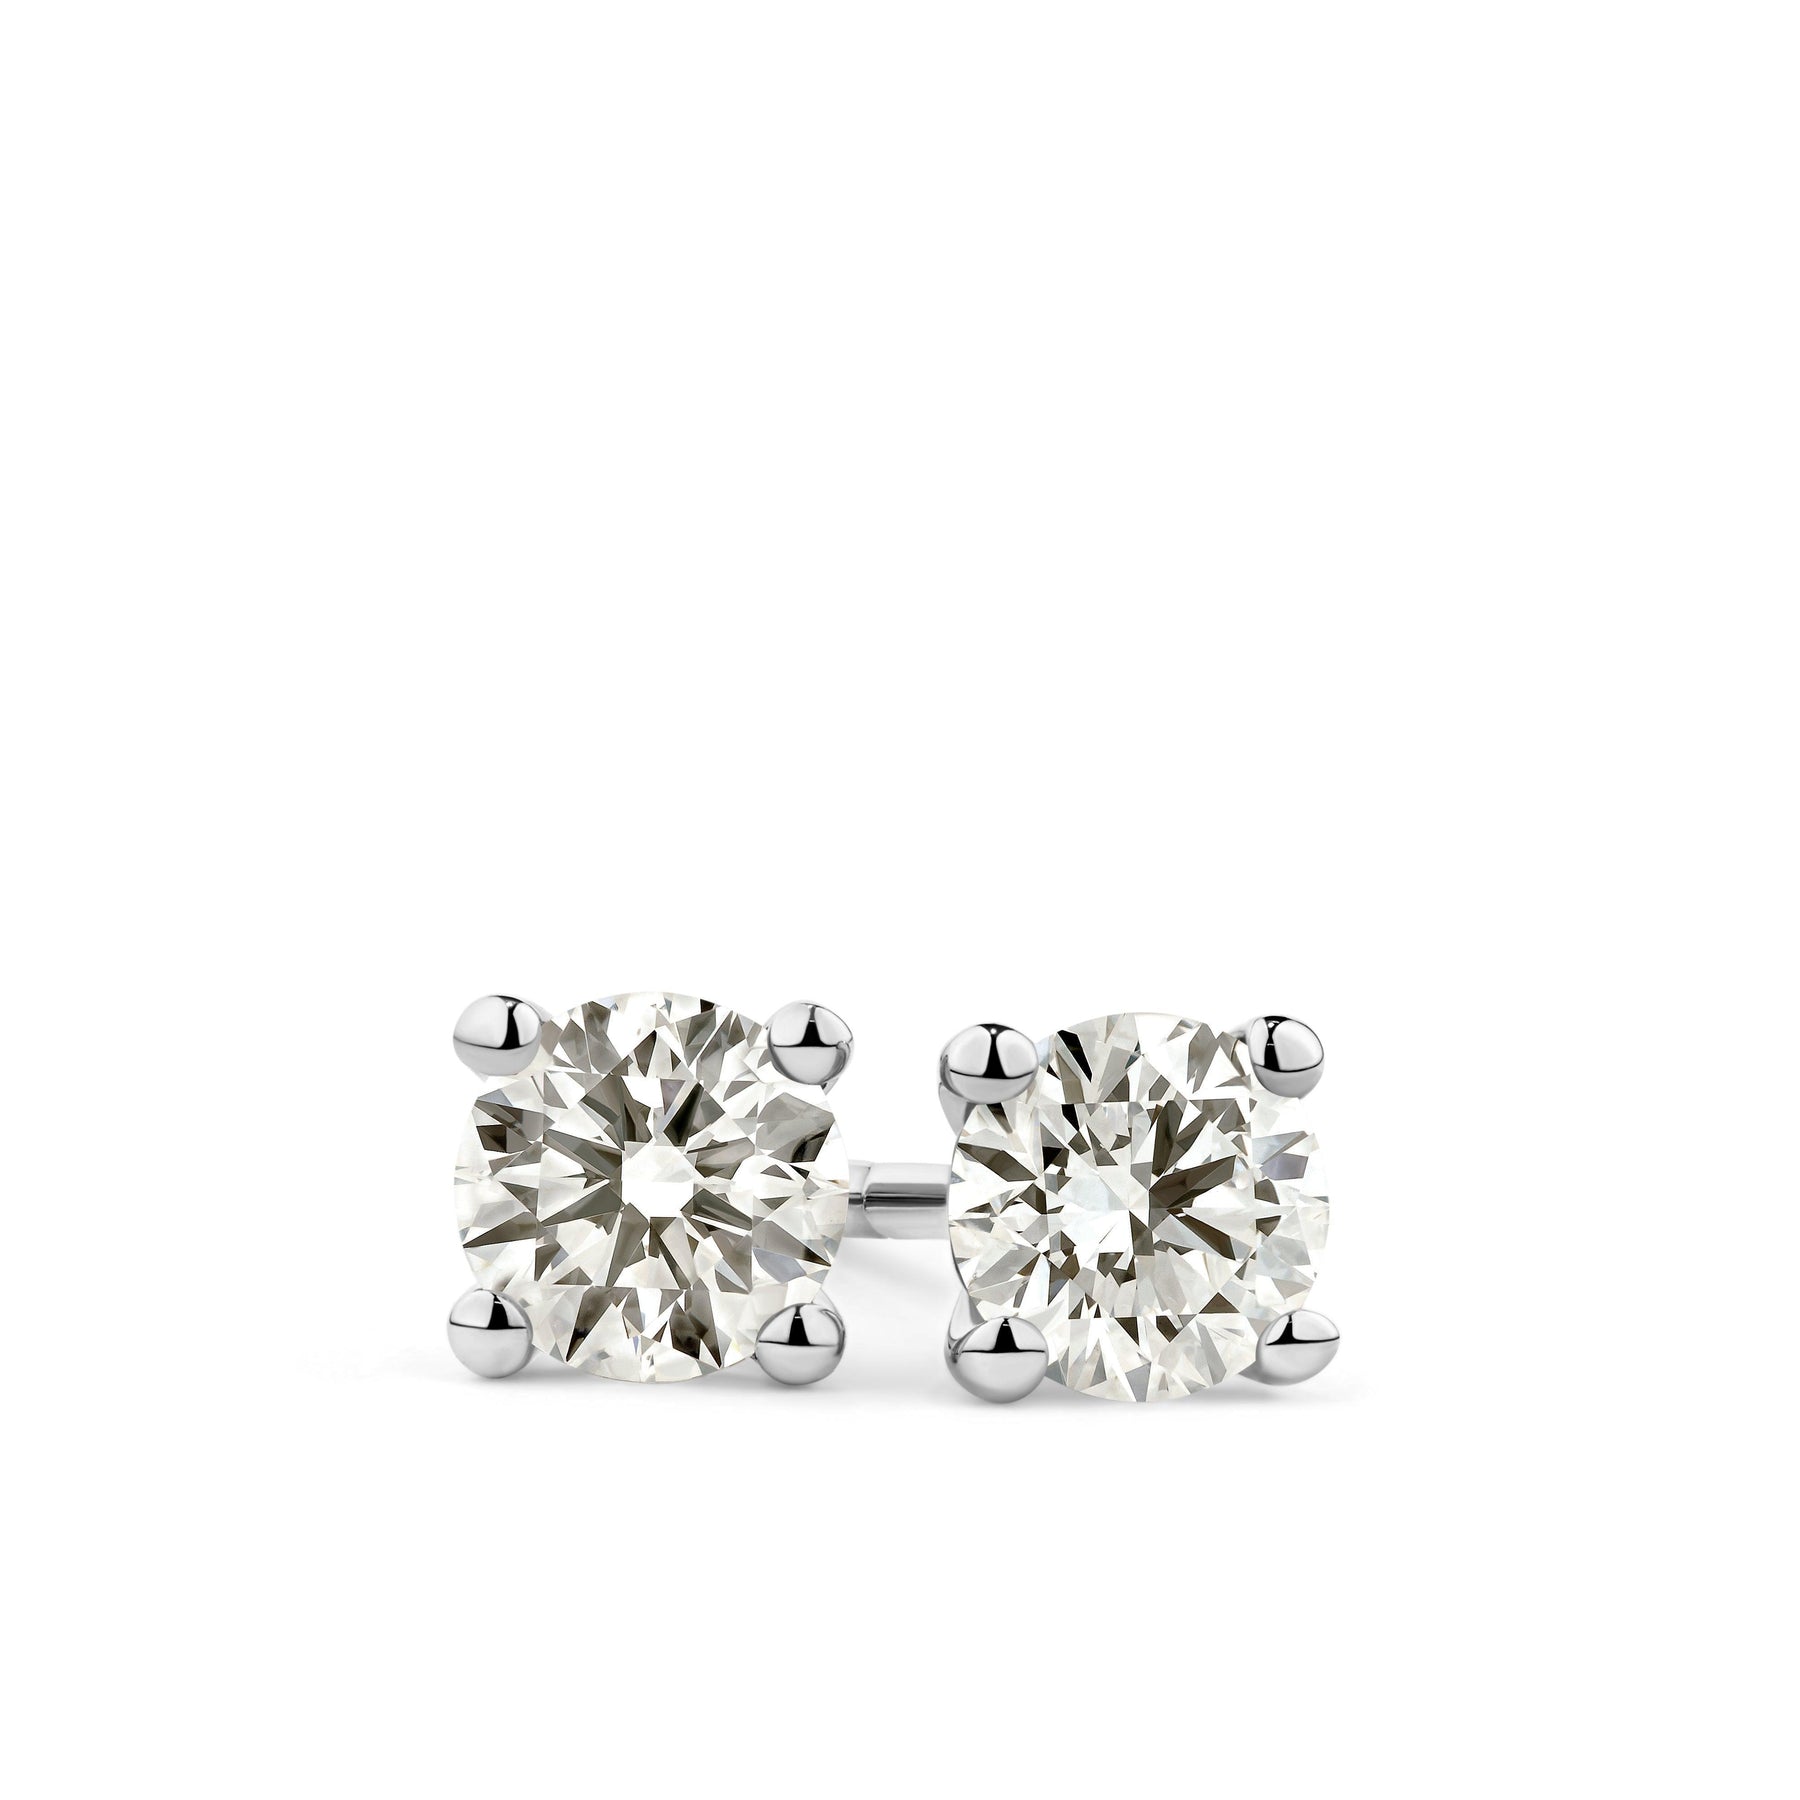 Rendition Solitaire Earrings in 9ct White Gold - Wallace Bishop